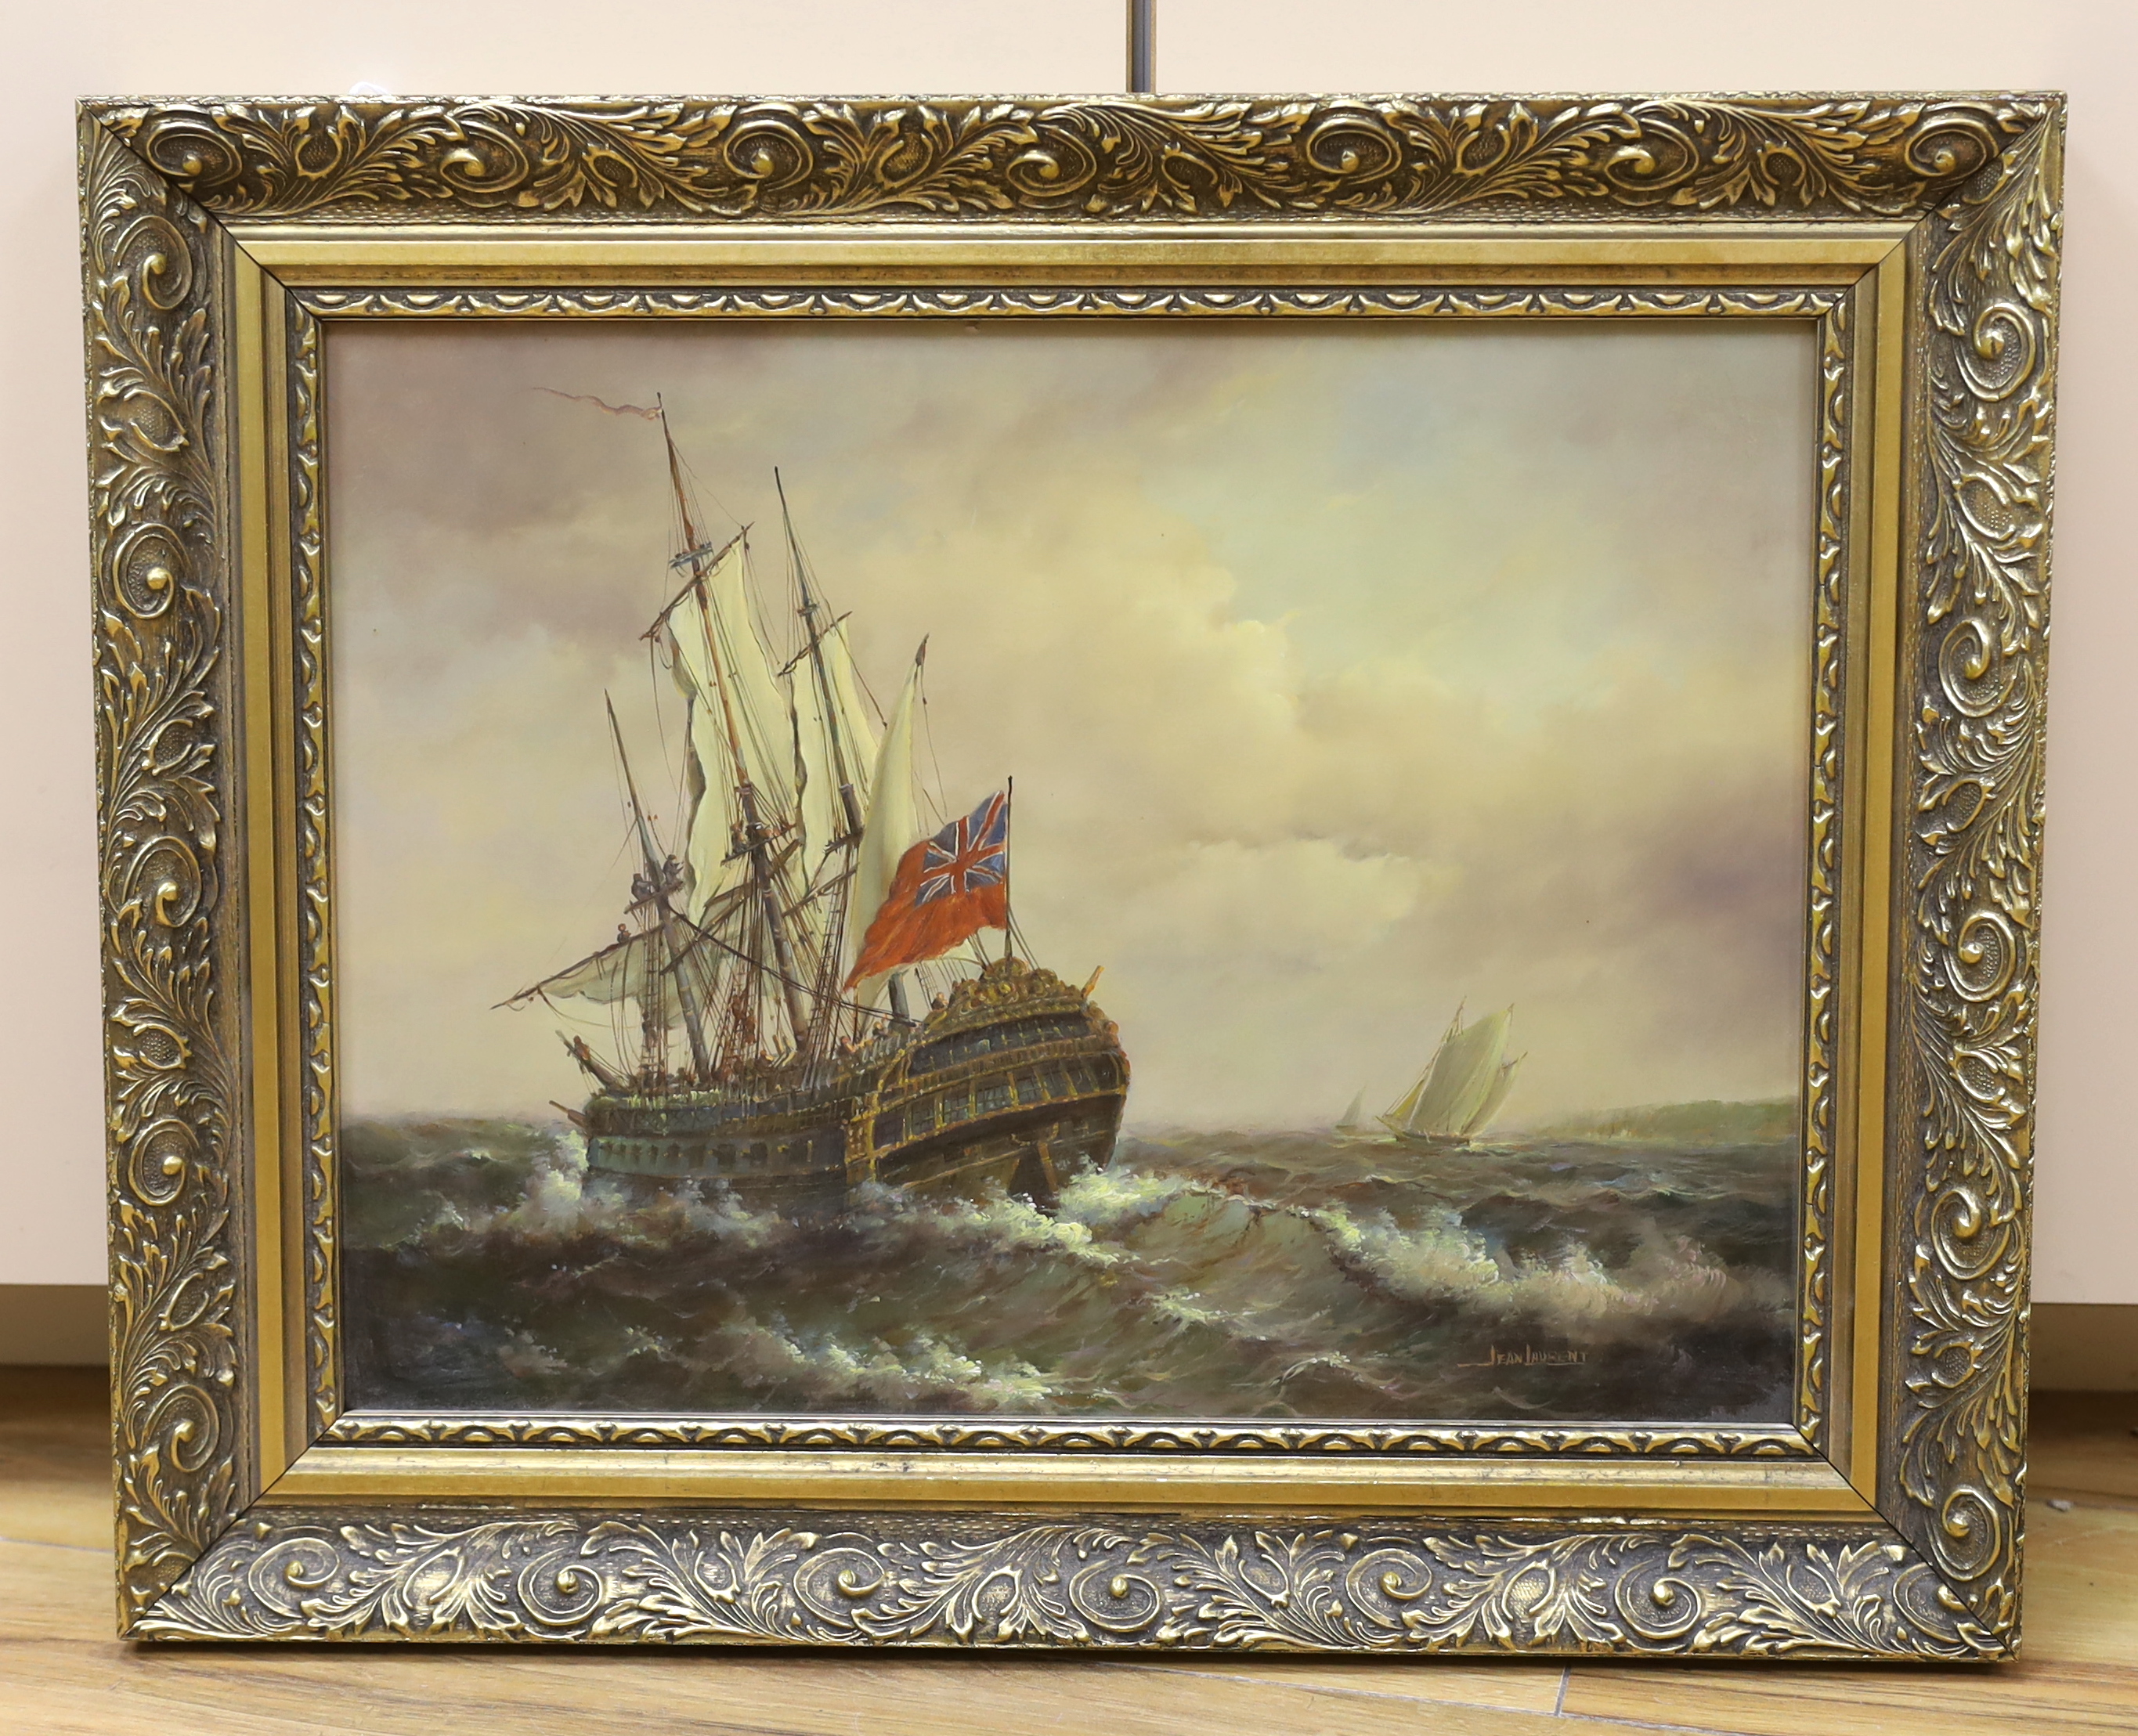 Jean Laurent (French, 1898-1988), oil on board, Early 19th century naval frigate, signed, 29 x 39cm